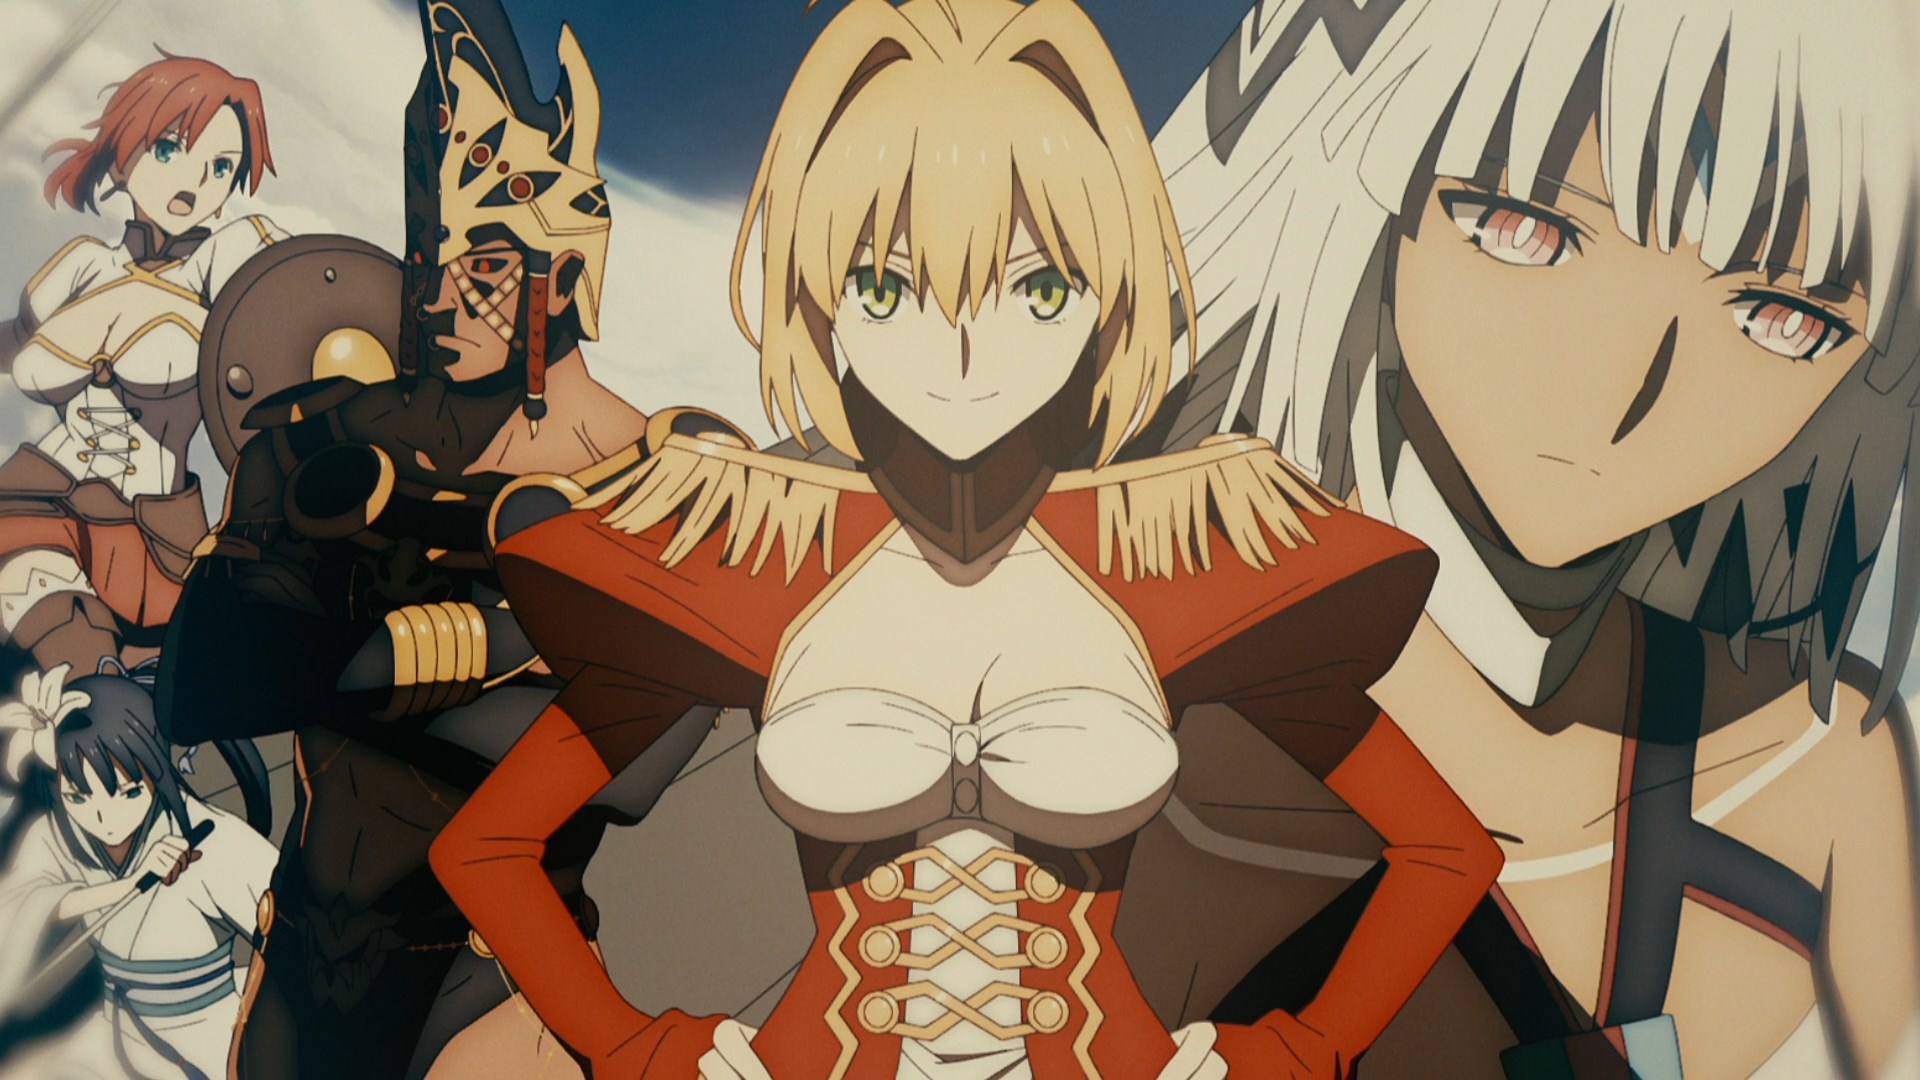 Fate/Grand Order – Absolute Demonic Front: Babylonia Review